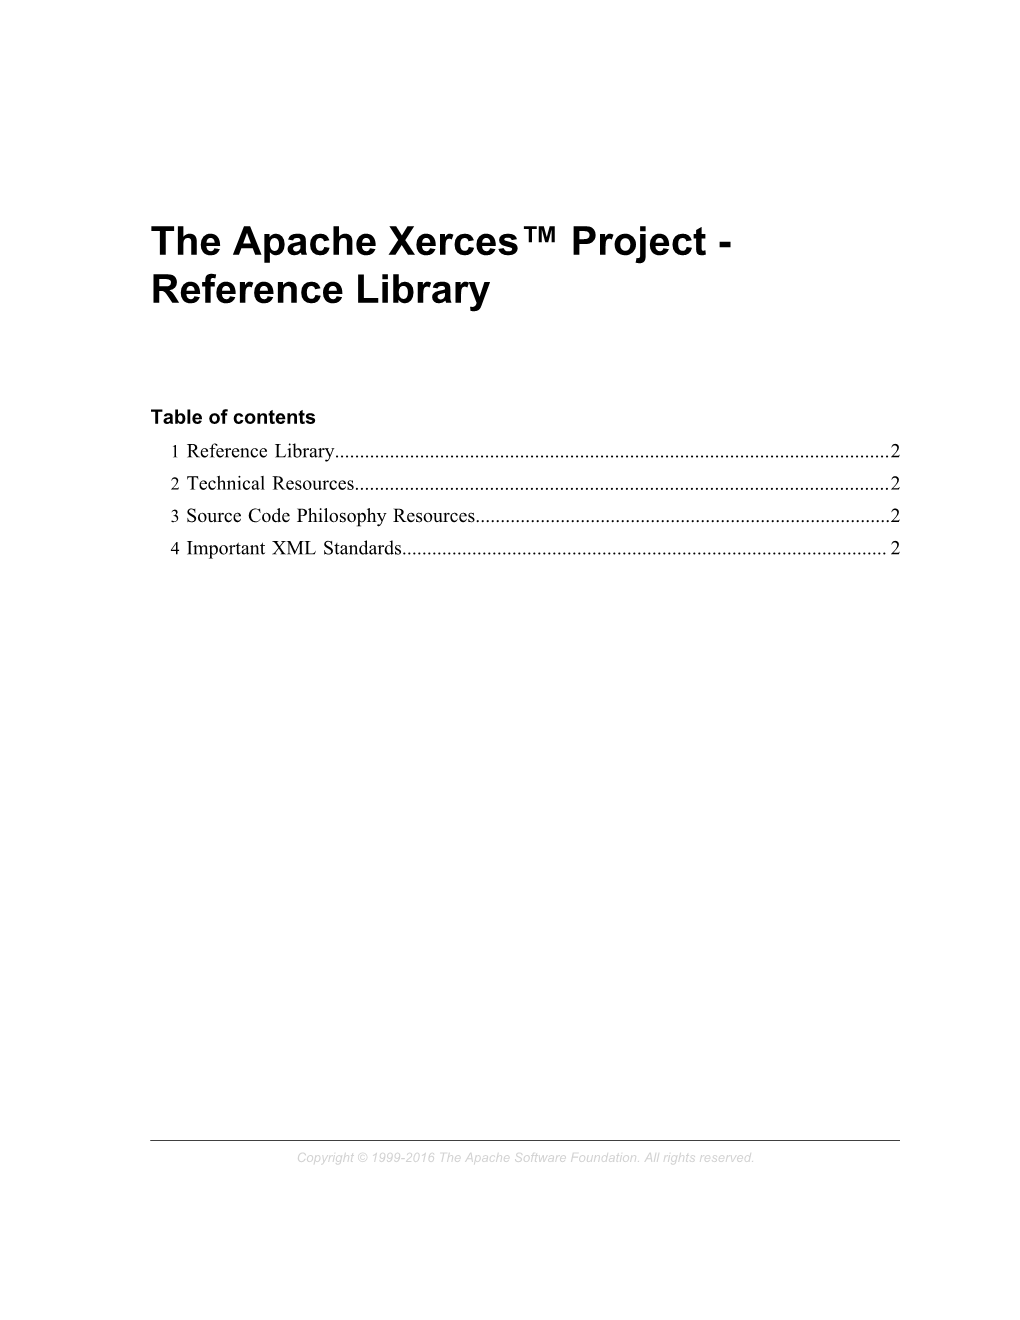 The Apache Xerces™ Project - Reference Library